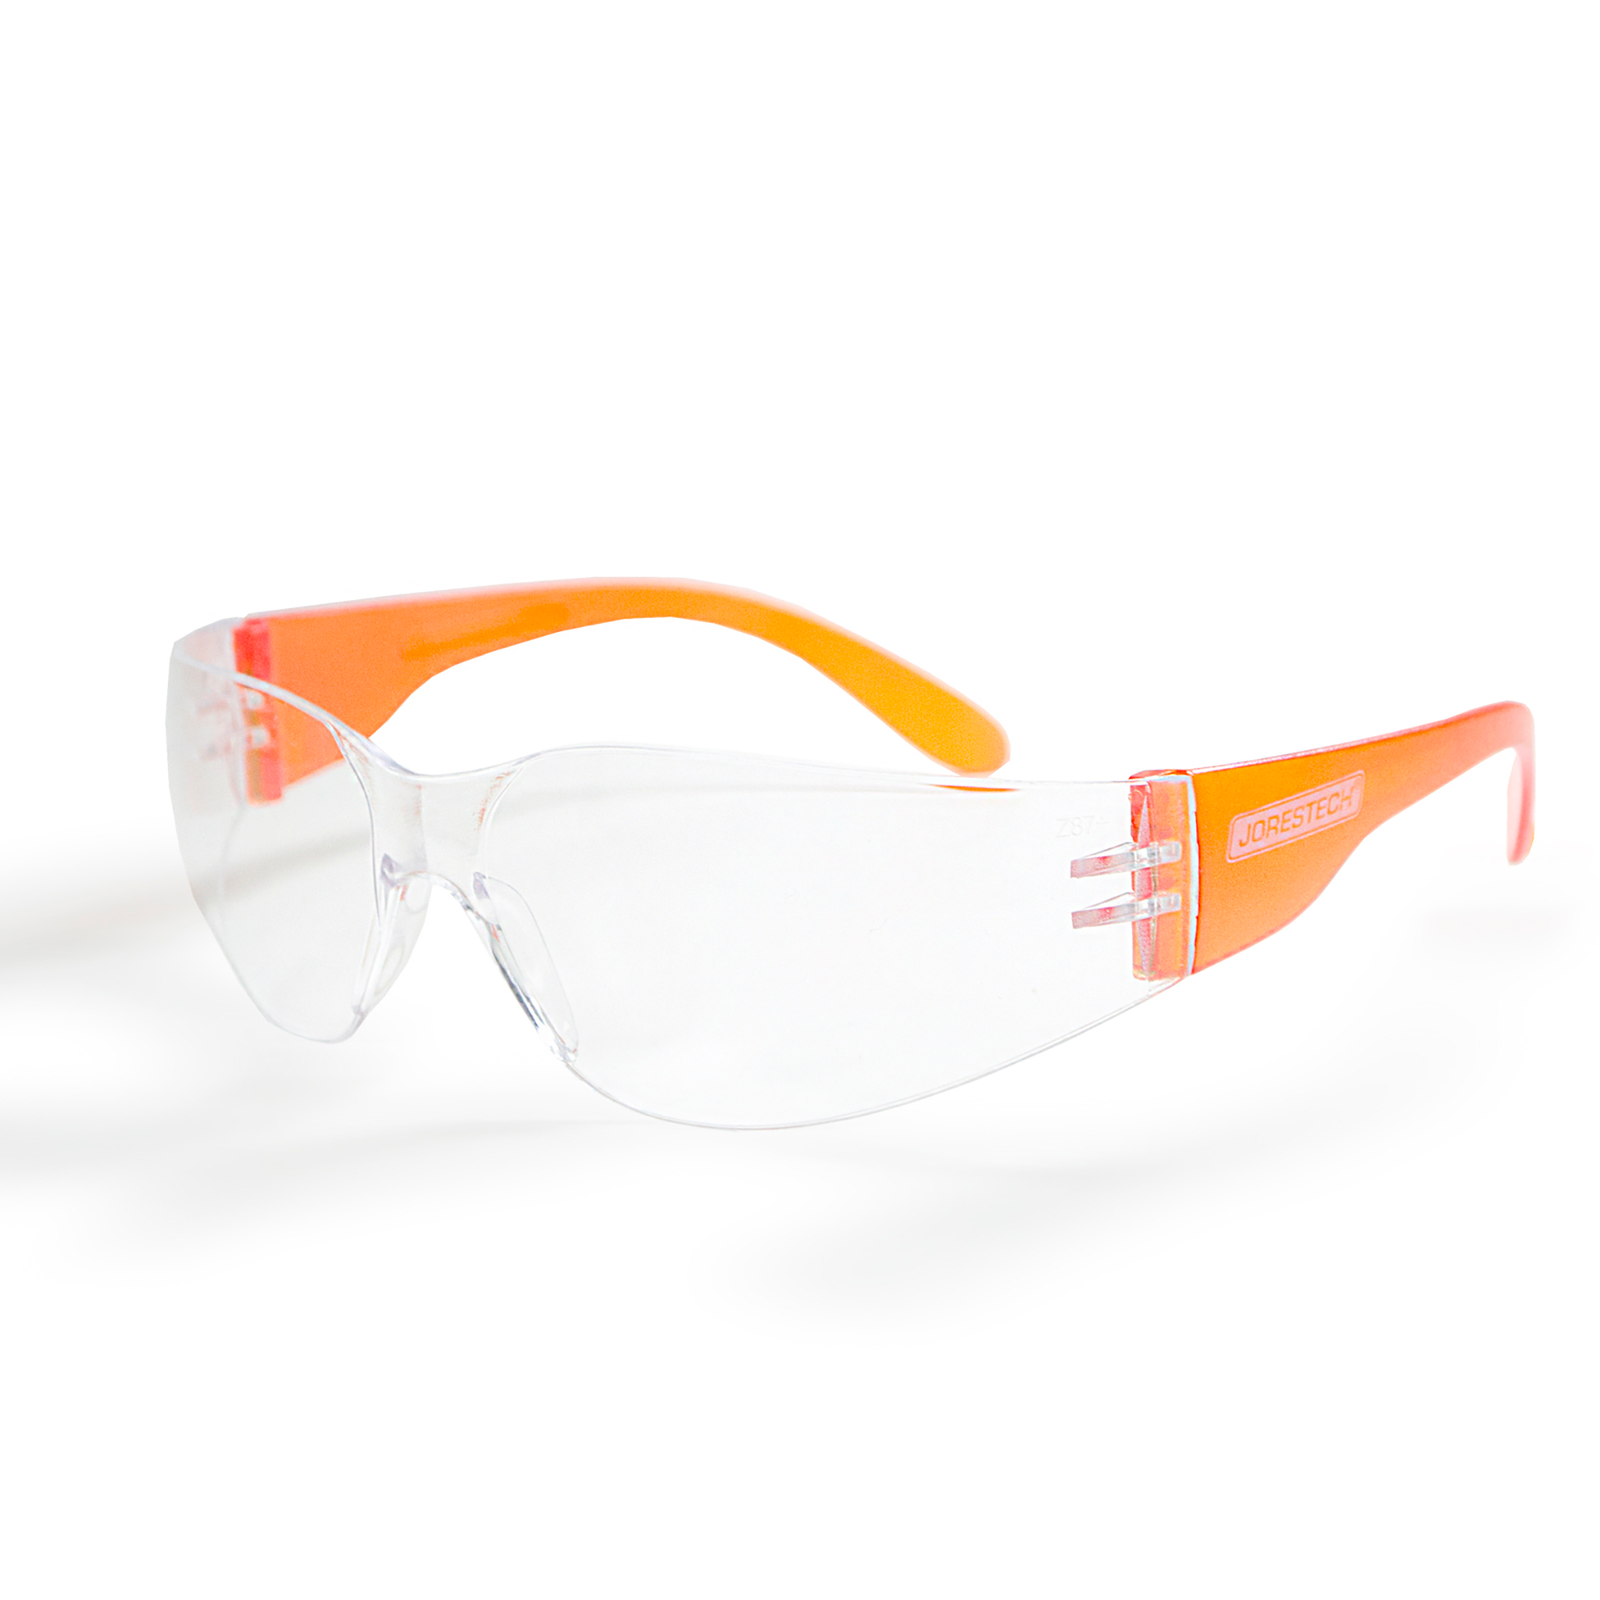 Features one JORESTECH high impact glass with clear lenses and orange temples over white background